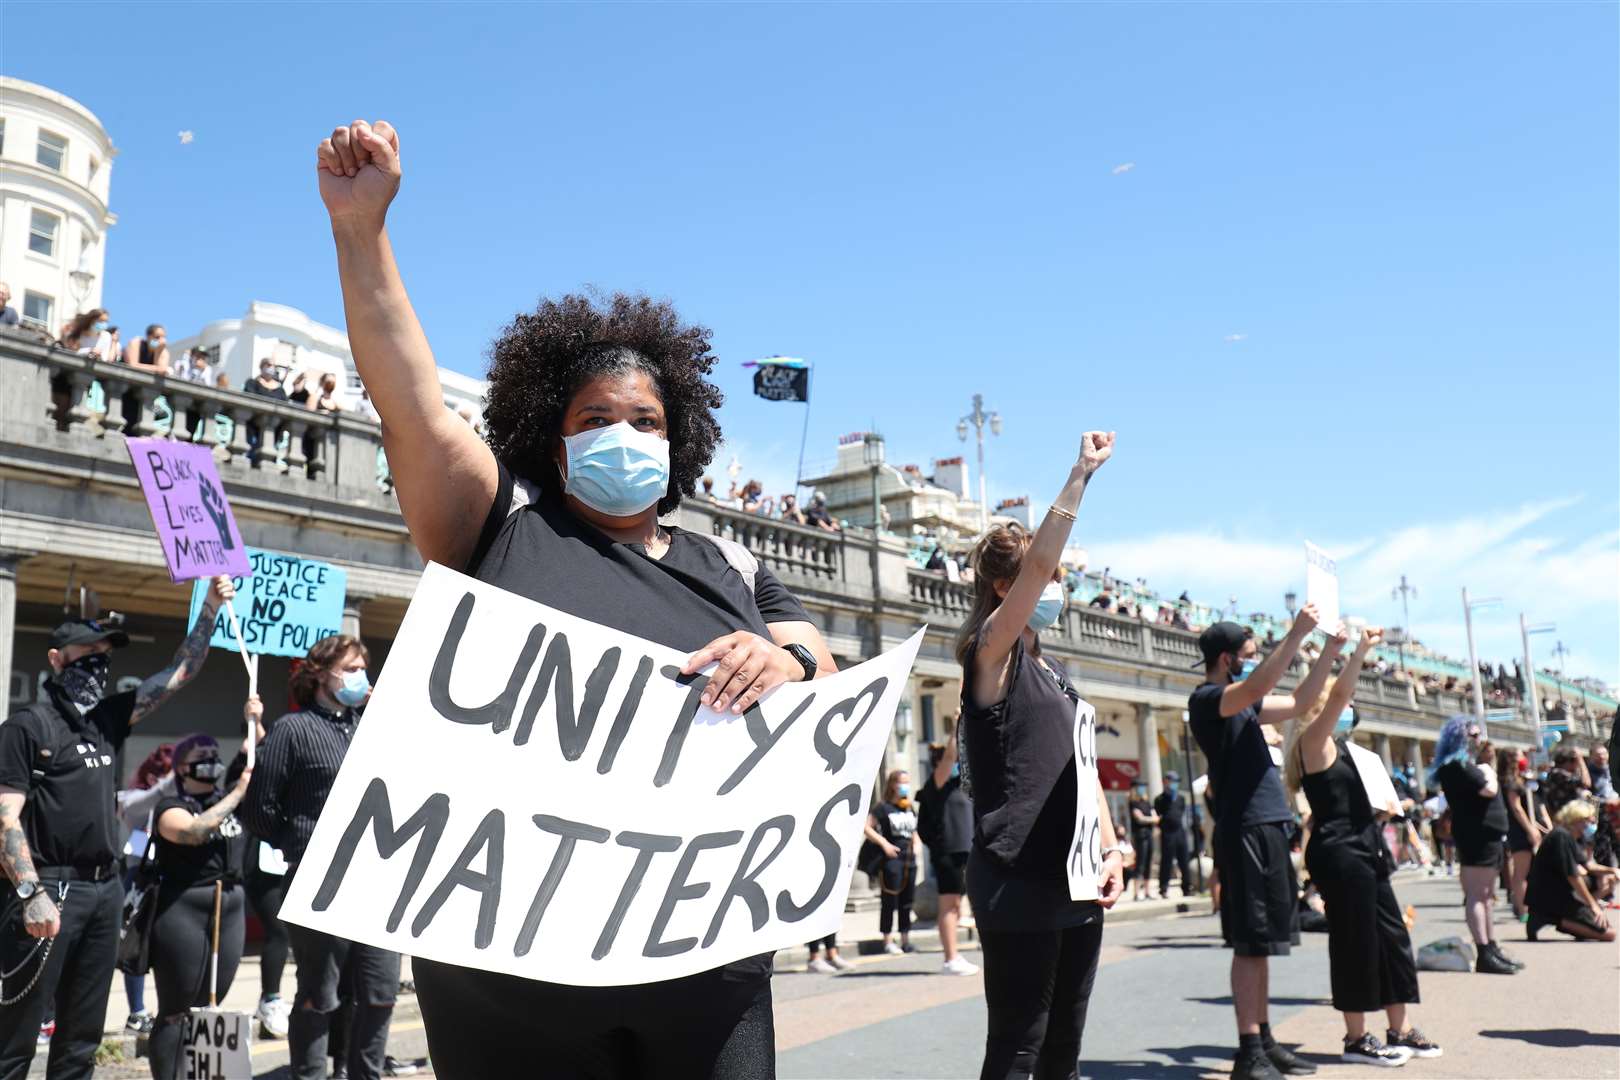 Protesters for the Black Lives Matter movement earlier lined the seafront (Andrew Matthews/PA)